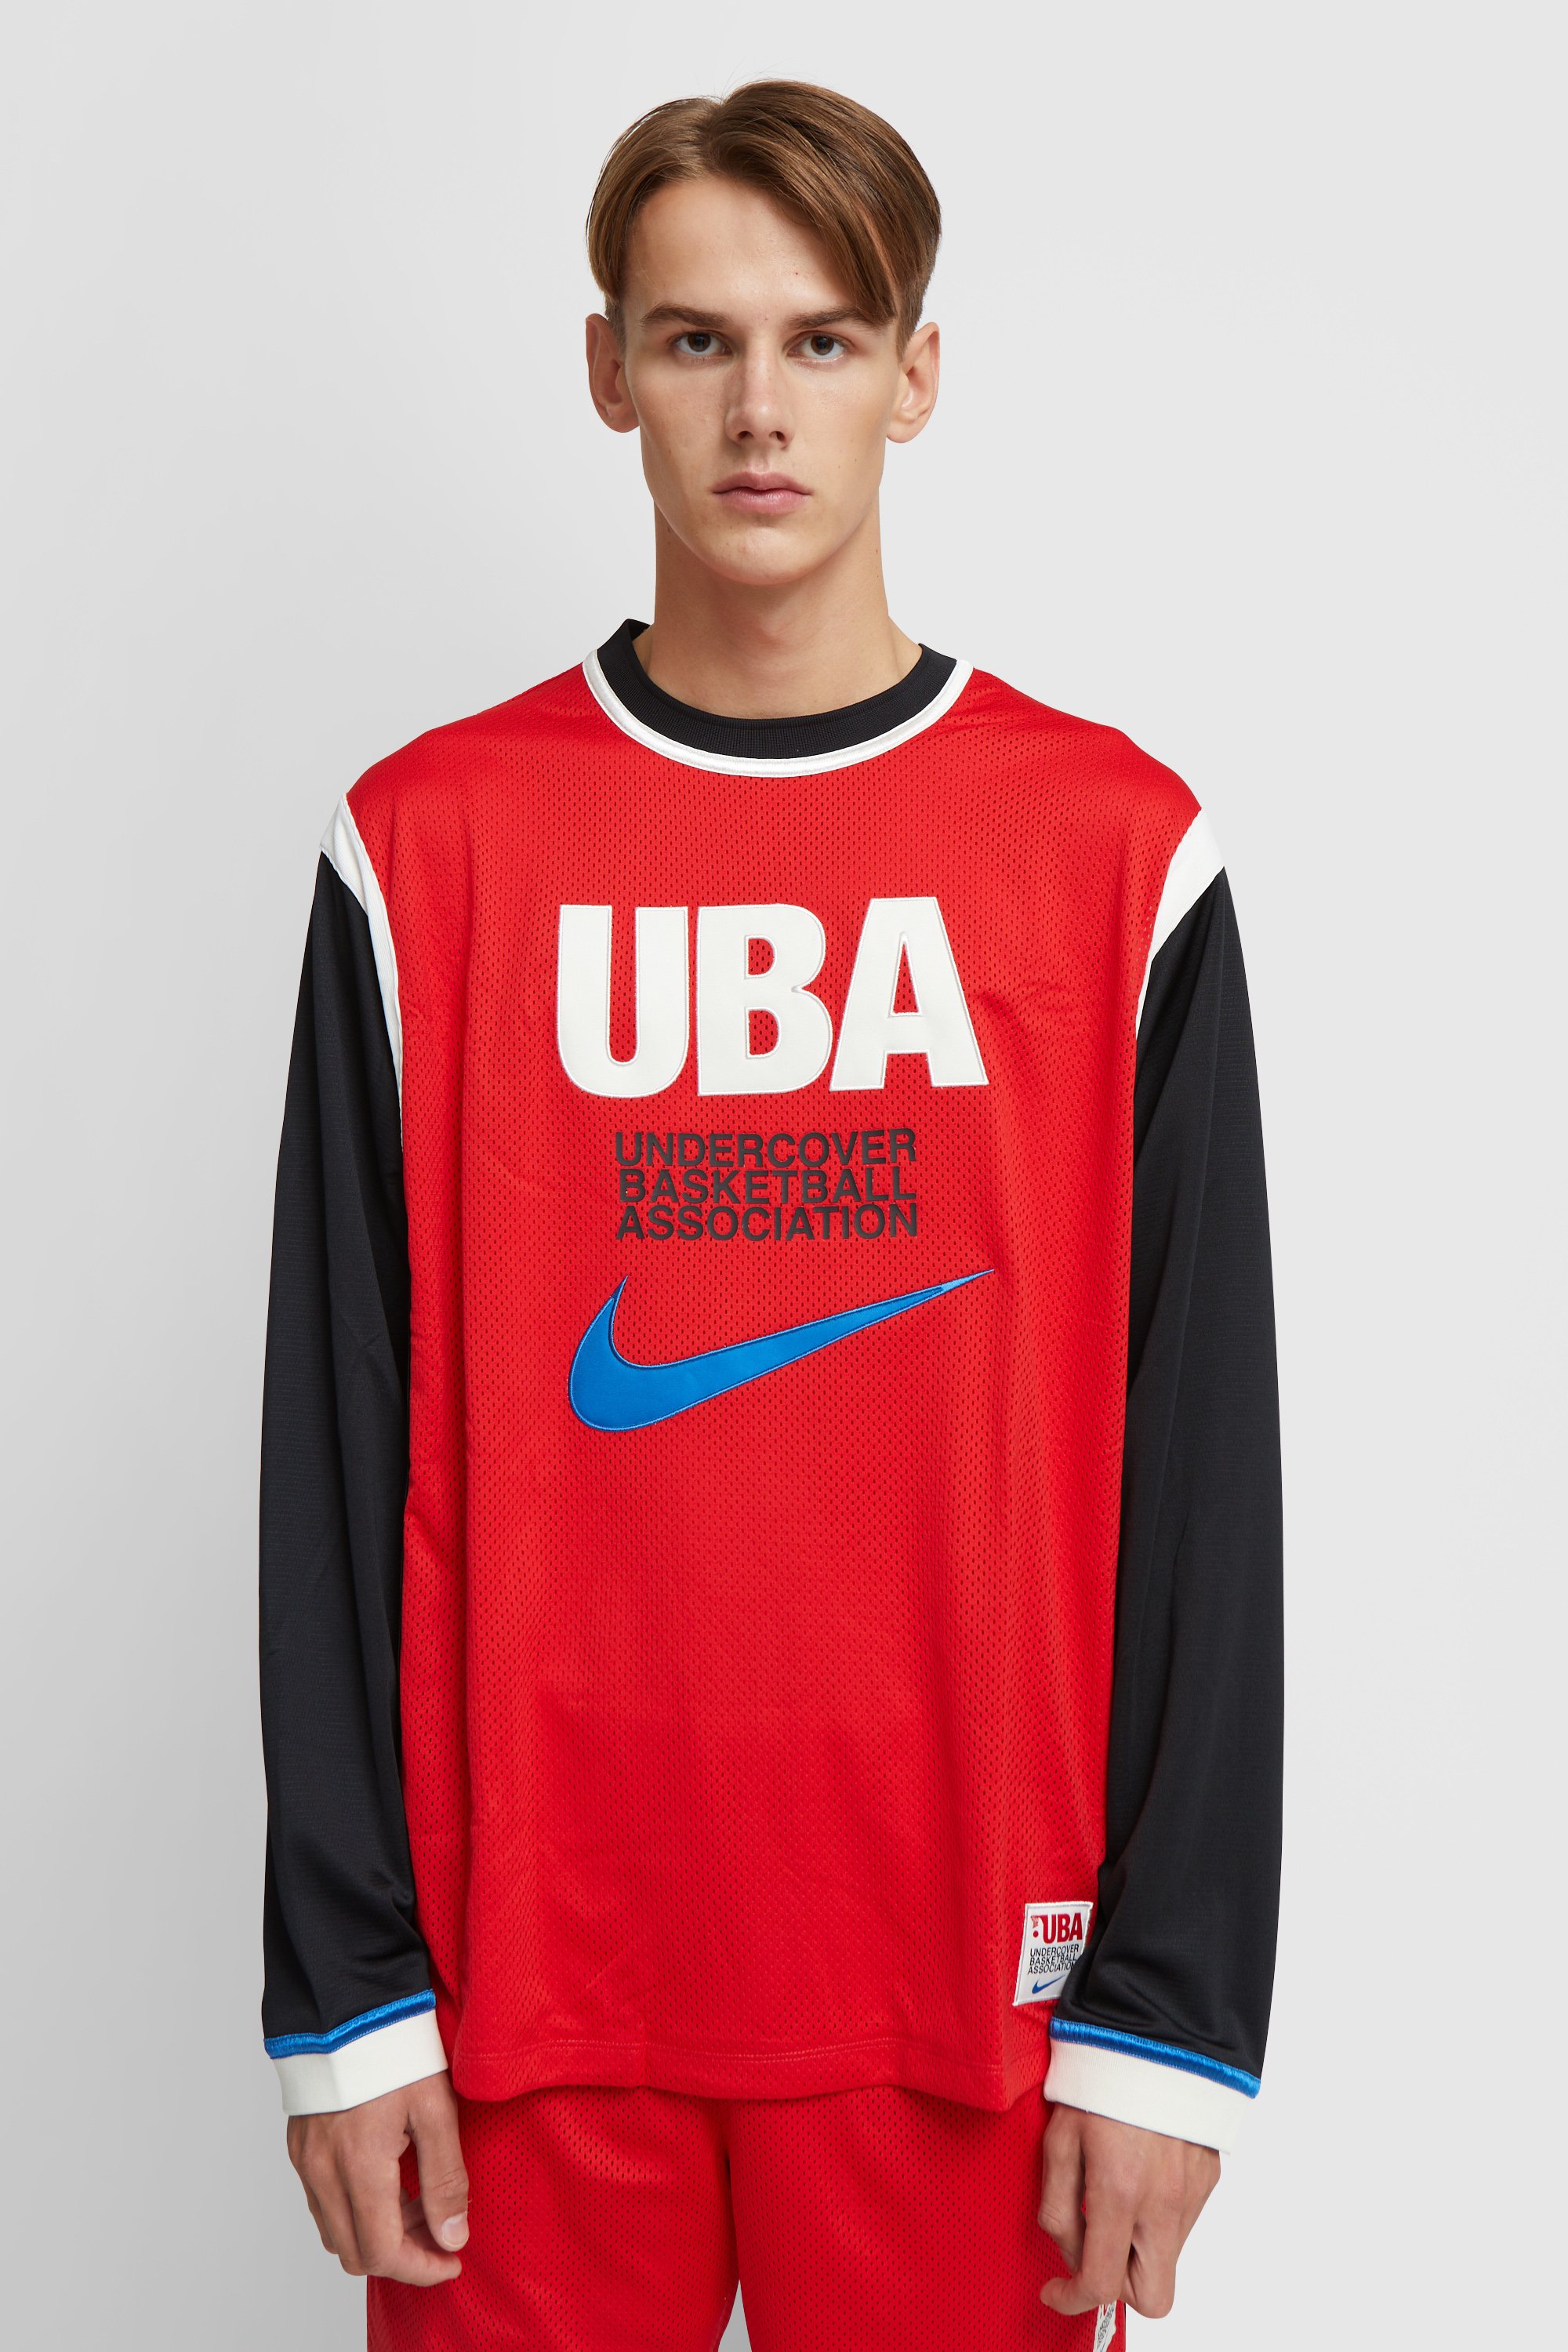 UNDERCOVER × NIKE Long-Sleeve Shooting Top カットソー レッド マルチカラー